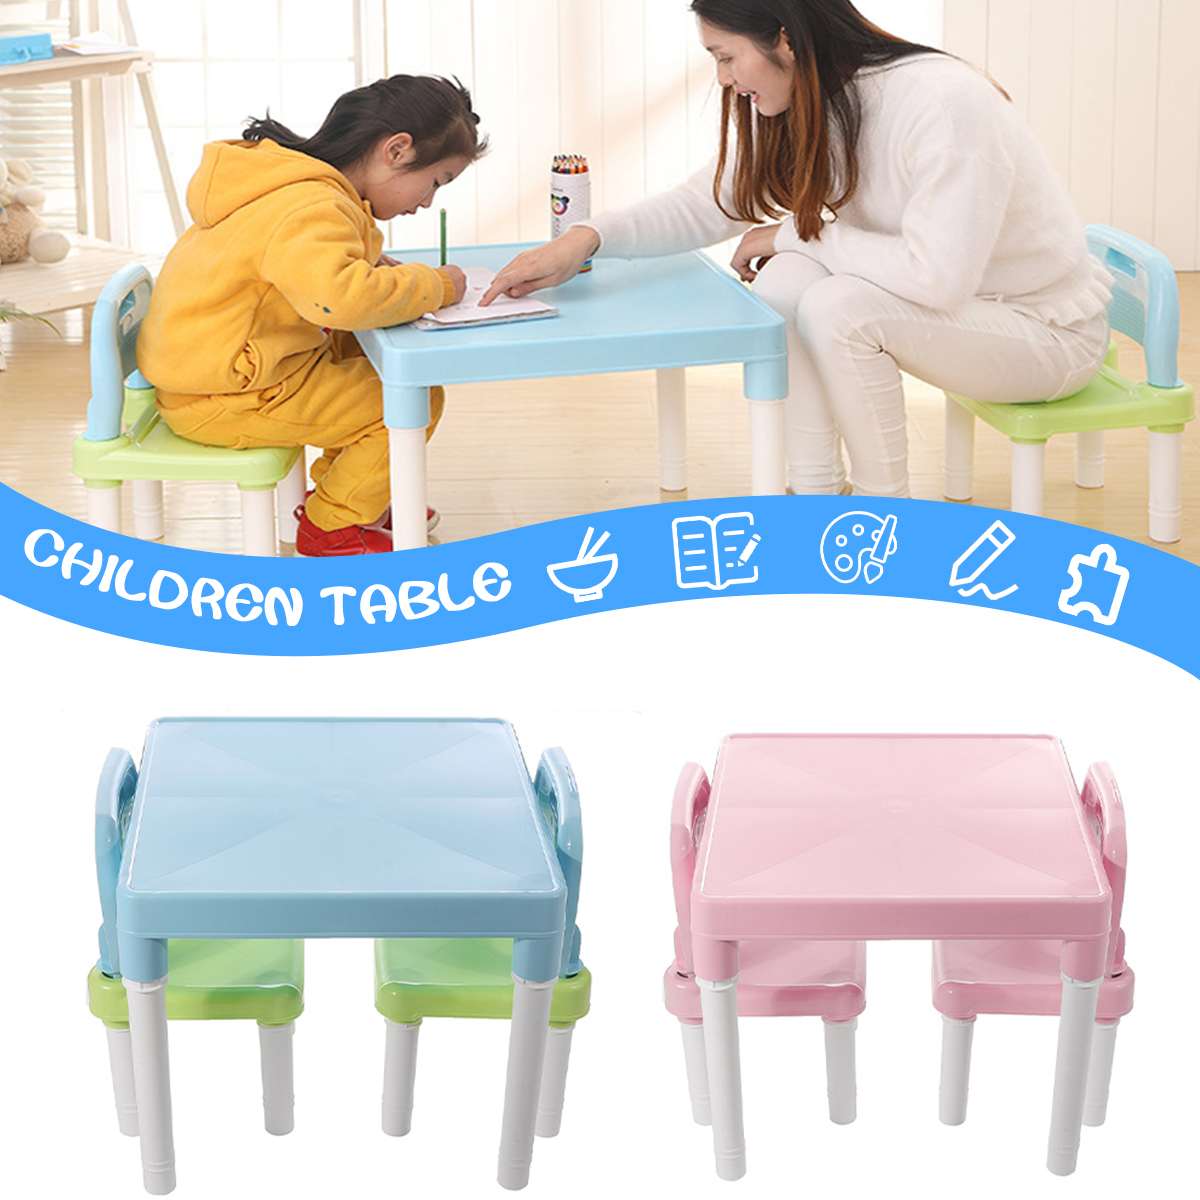 Toddler Table And Chair Set Plastic : Kids Table And Chairs Set Toddler Activity Chair Best For Toddlers Lego Reading Train Art Play Room 4 Childrens Seats With 1 Tables Sets Little Kid Children Furniture Accessories Plastic Desk / Find the best toddler table and chairs in our review.